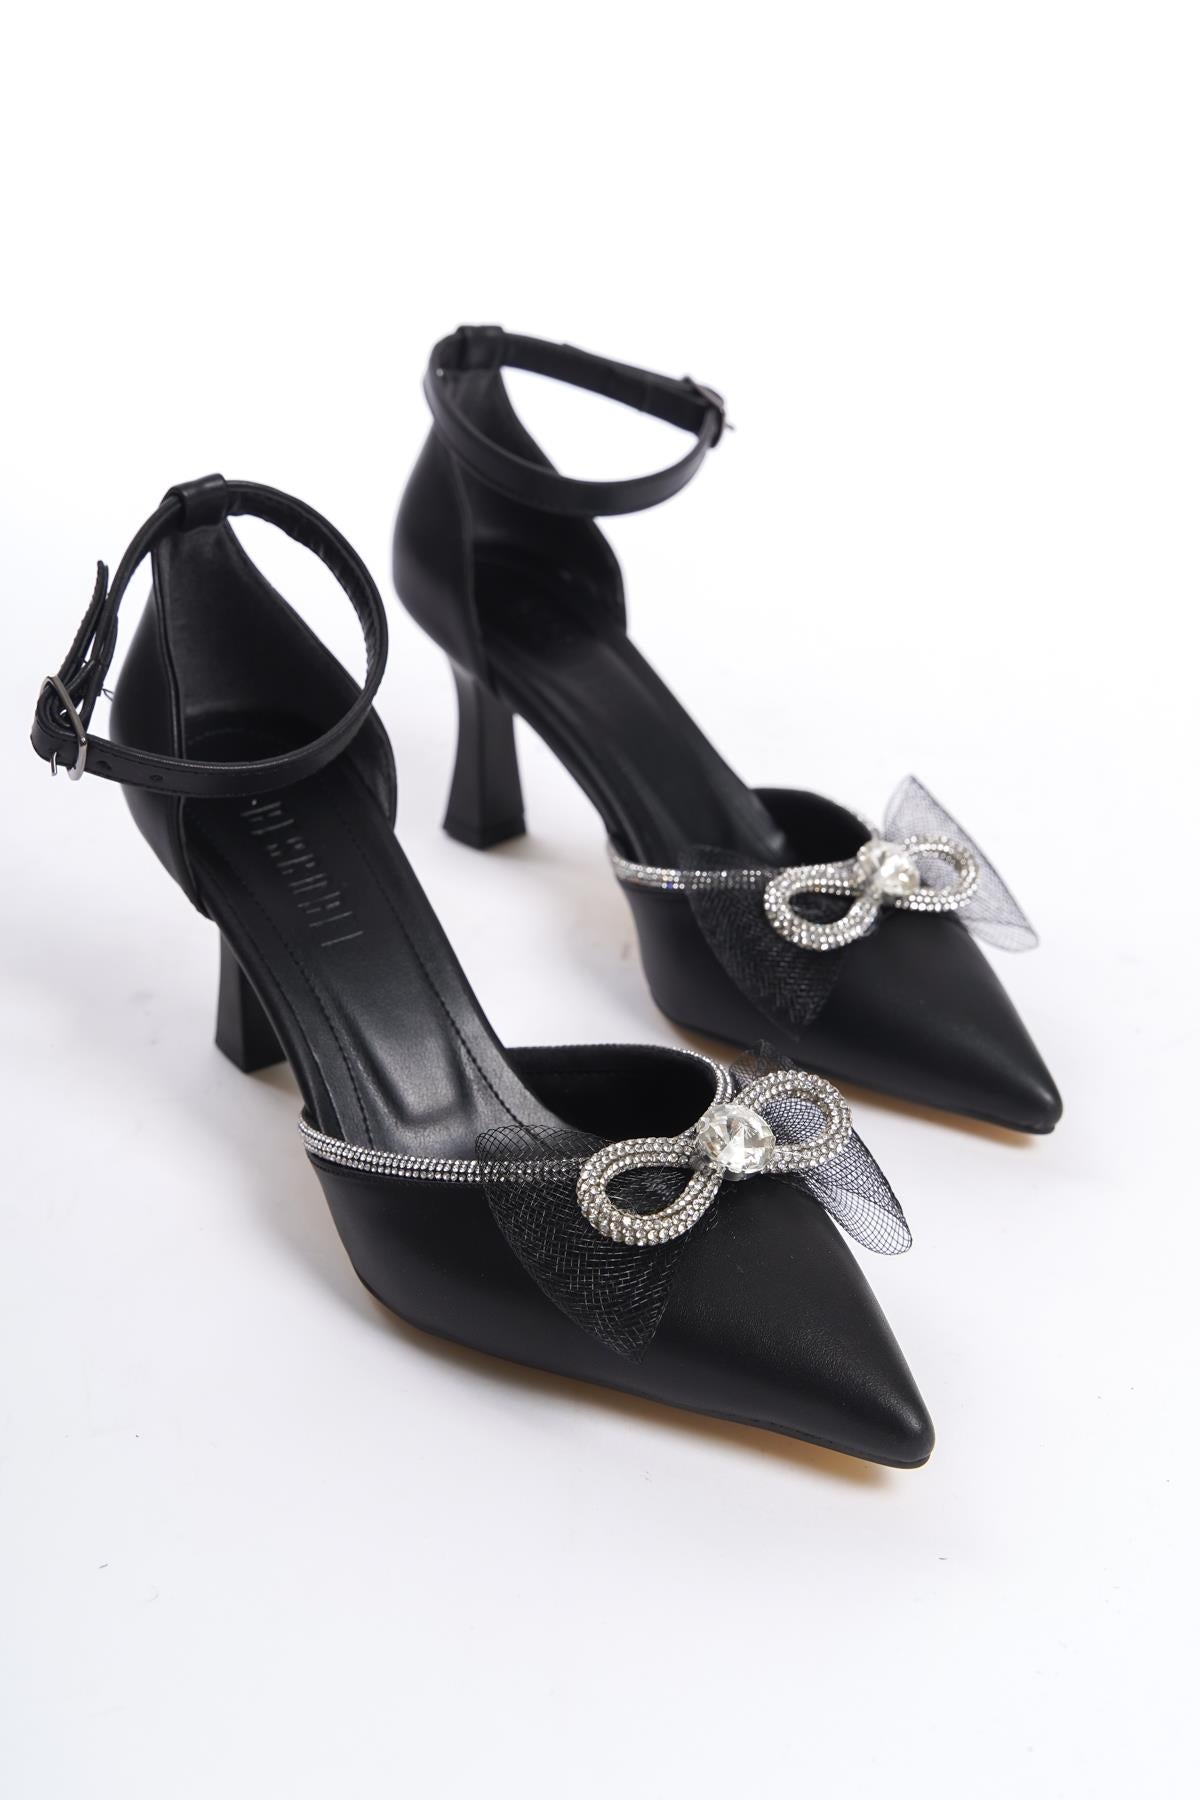 Women's Asda Black Thin Heel Bow Evening Dress Pointed Toe Shoes - STREETMODE™